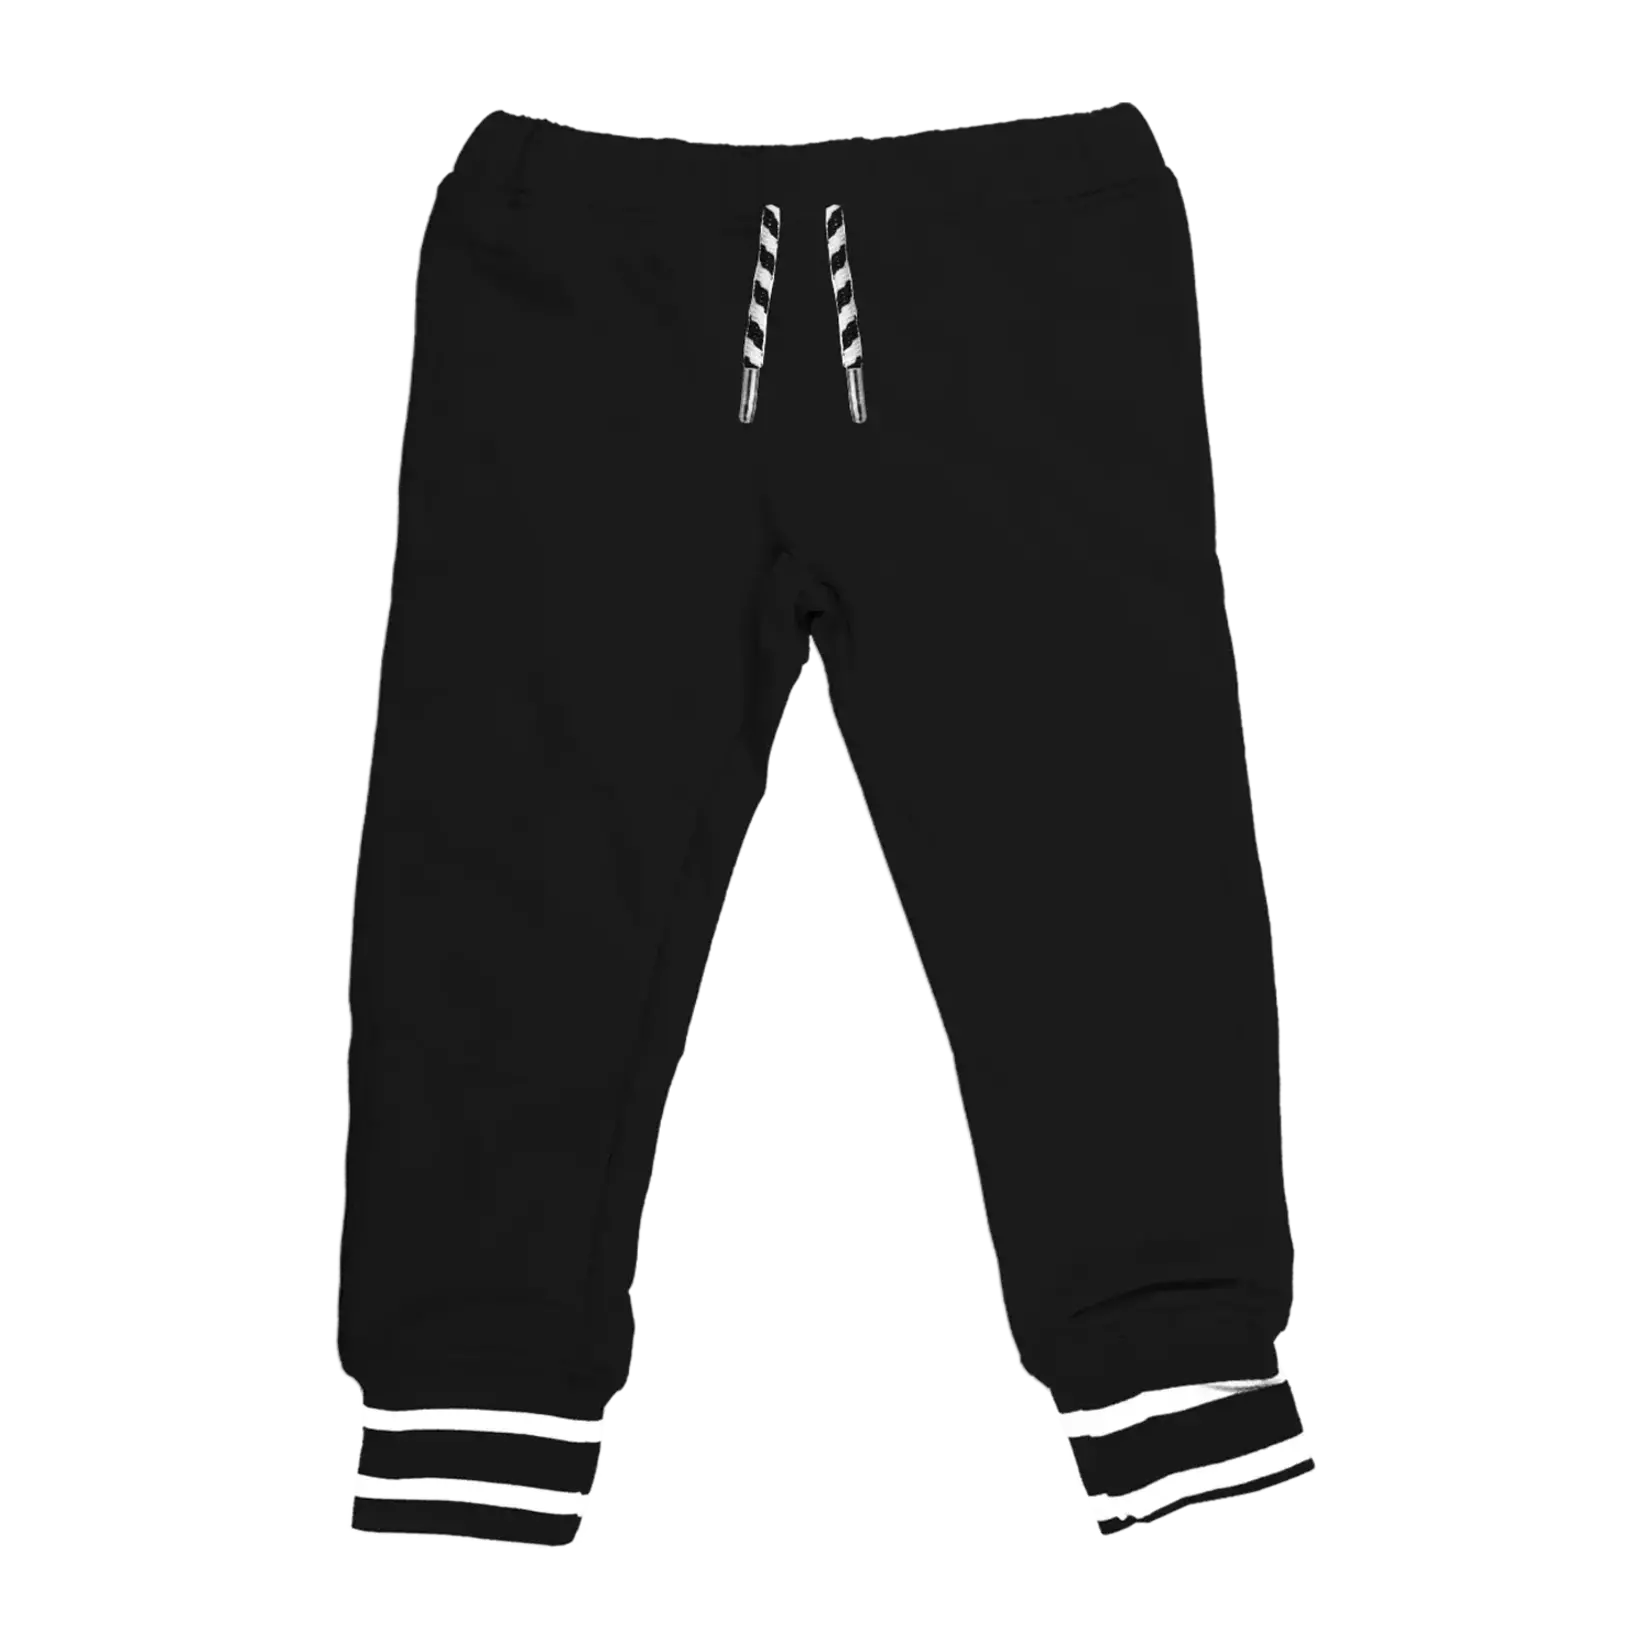 Whistle & Flute Whistle & Flute - Bamboo Drawstring Cuffed Joggers - Black